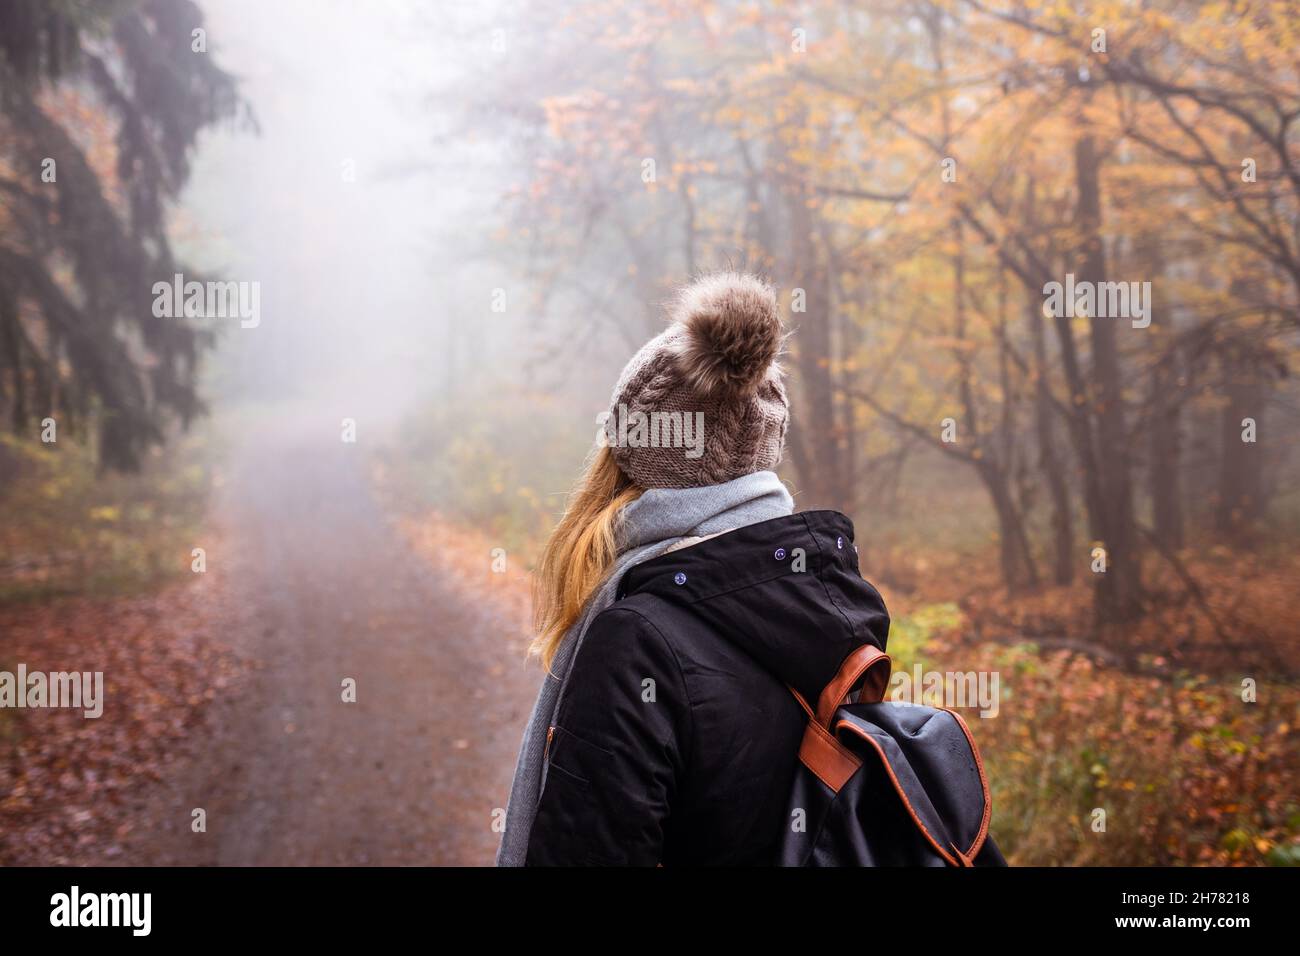 Woman with backpack and knit hat hiking in foggy forest. Tourist looking for adventure in nature. Mystery woodland Stock Photo